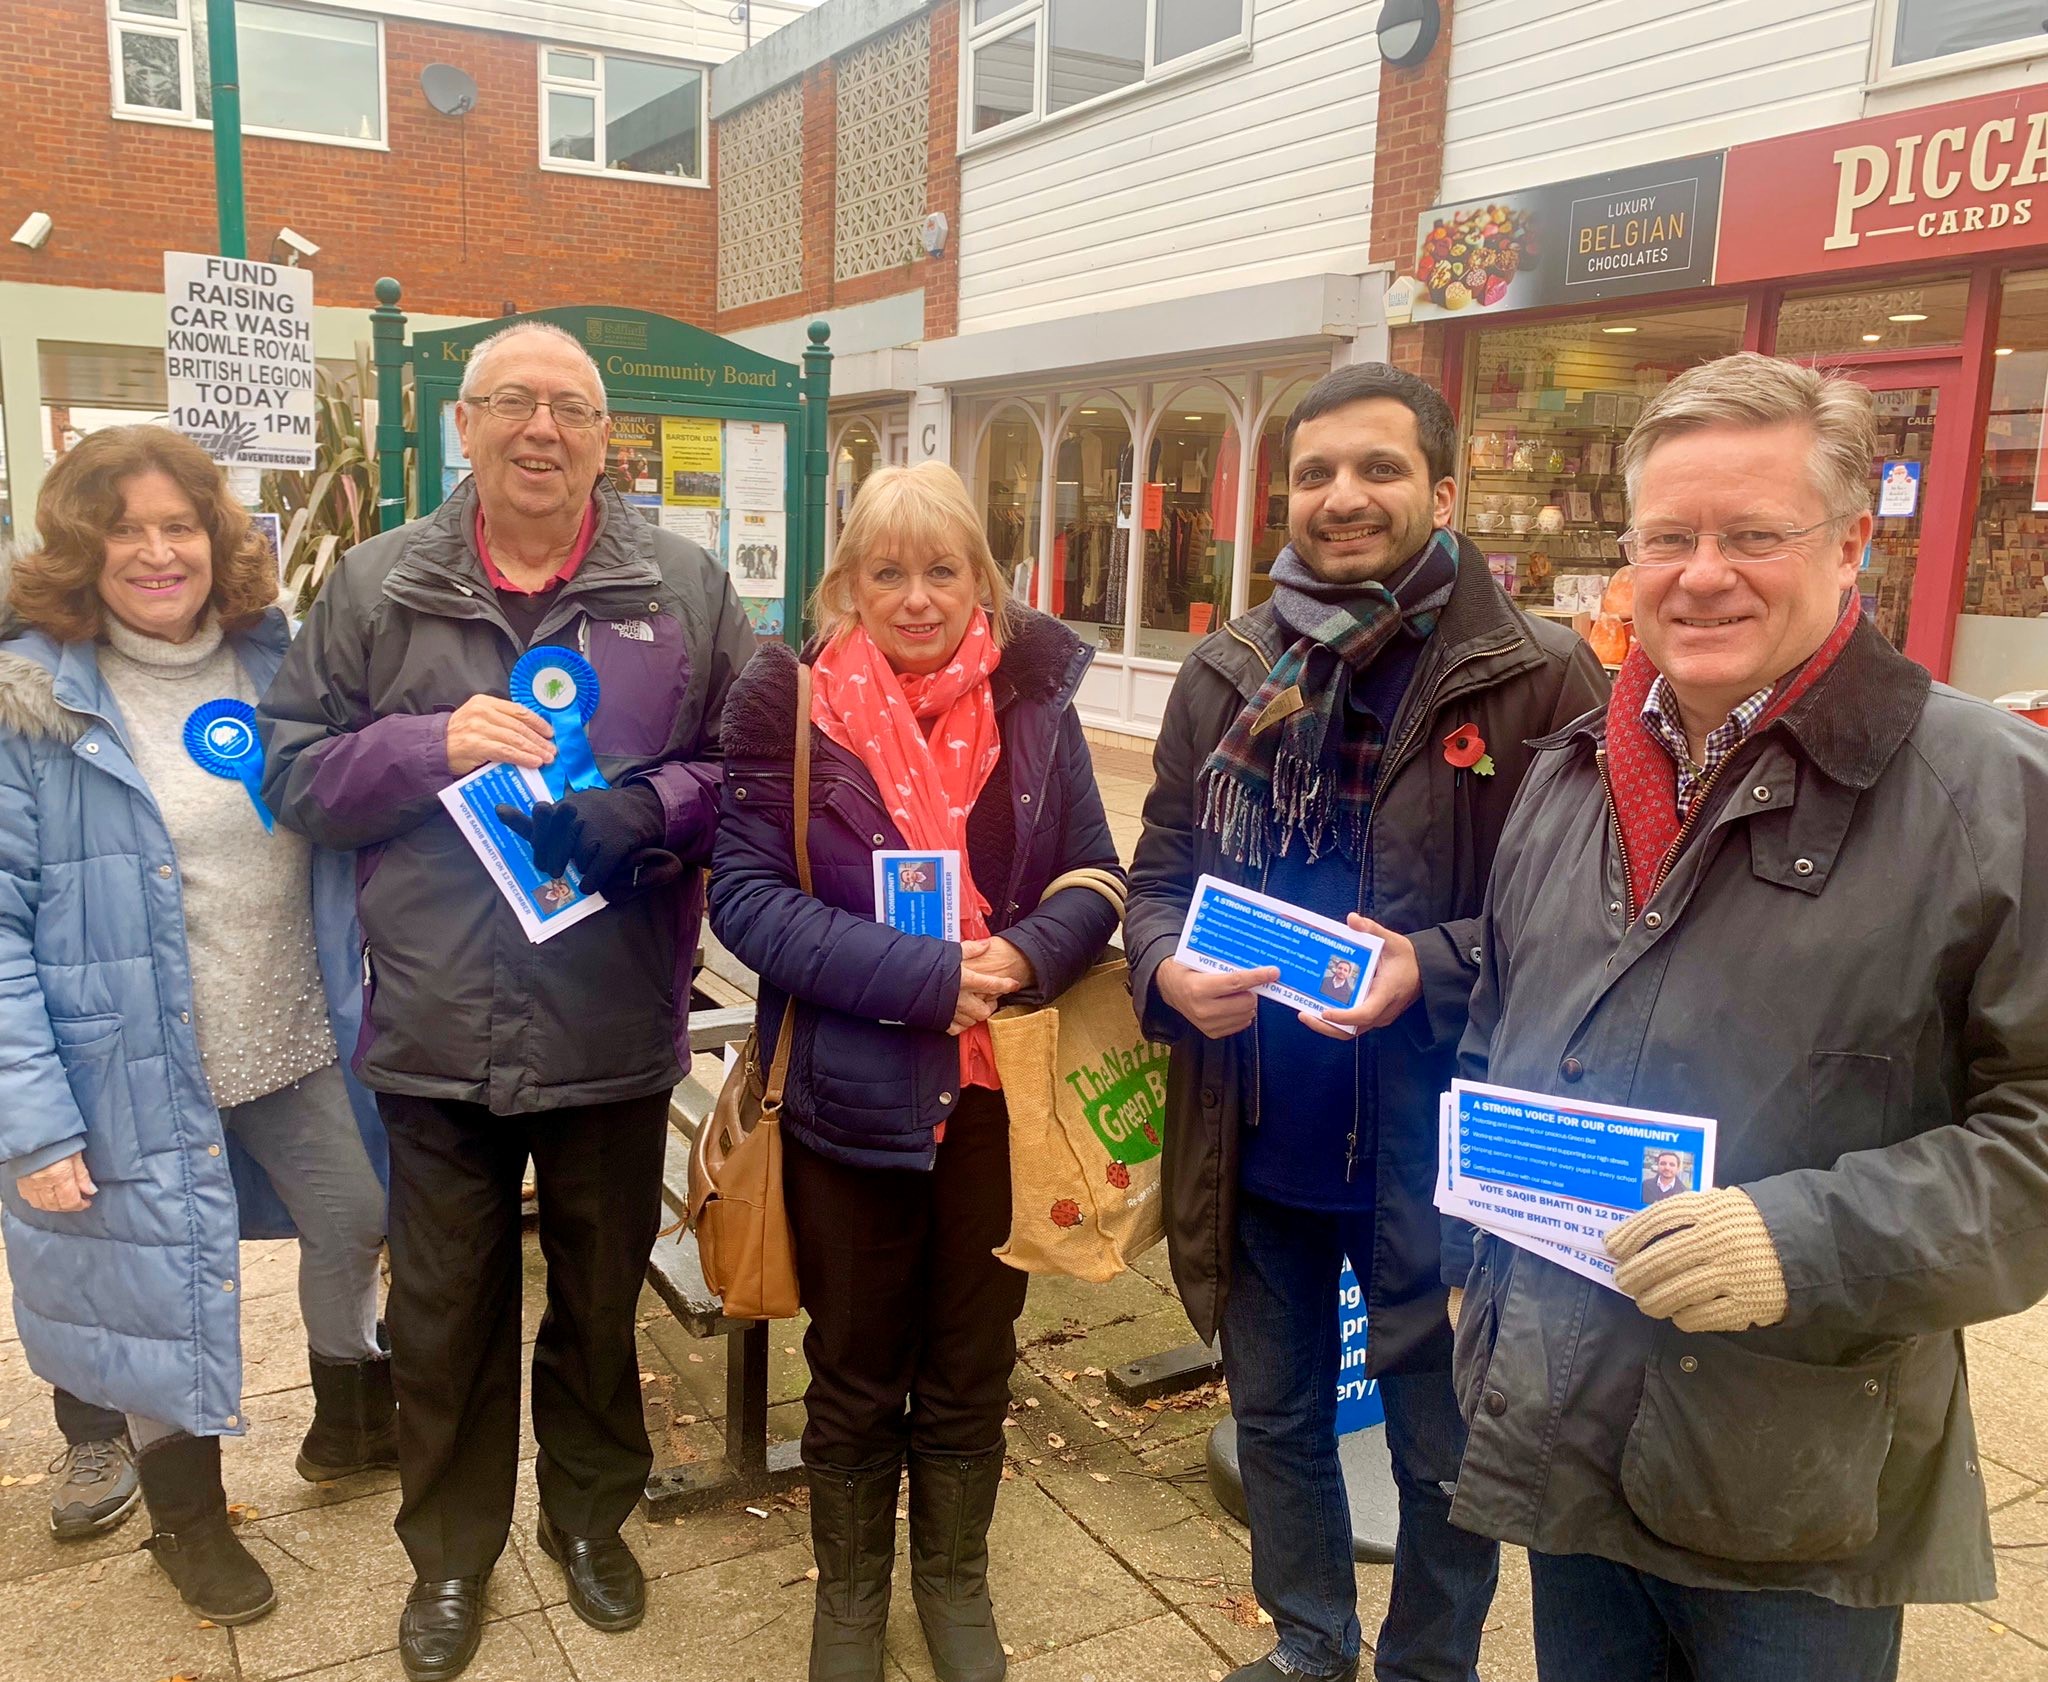 knowle team campaigning